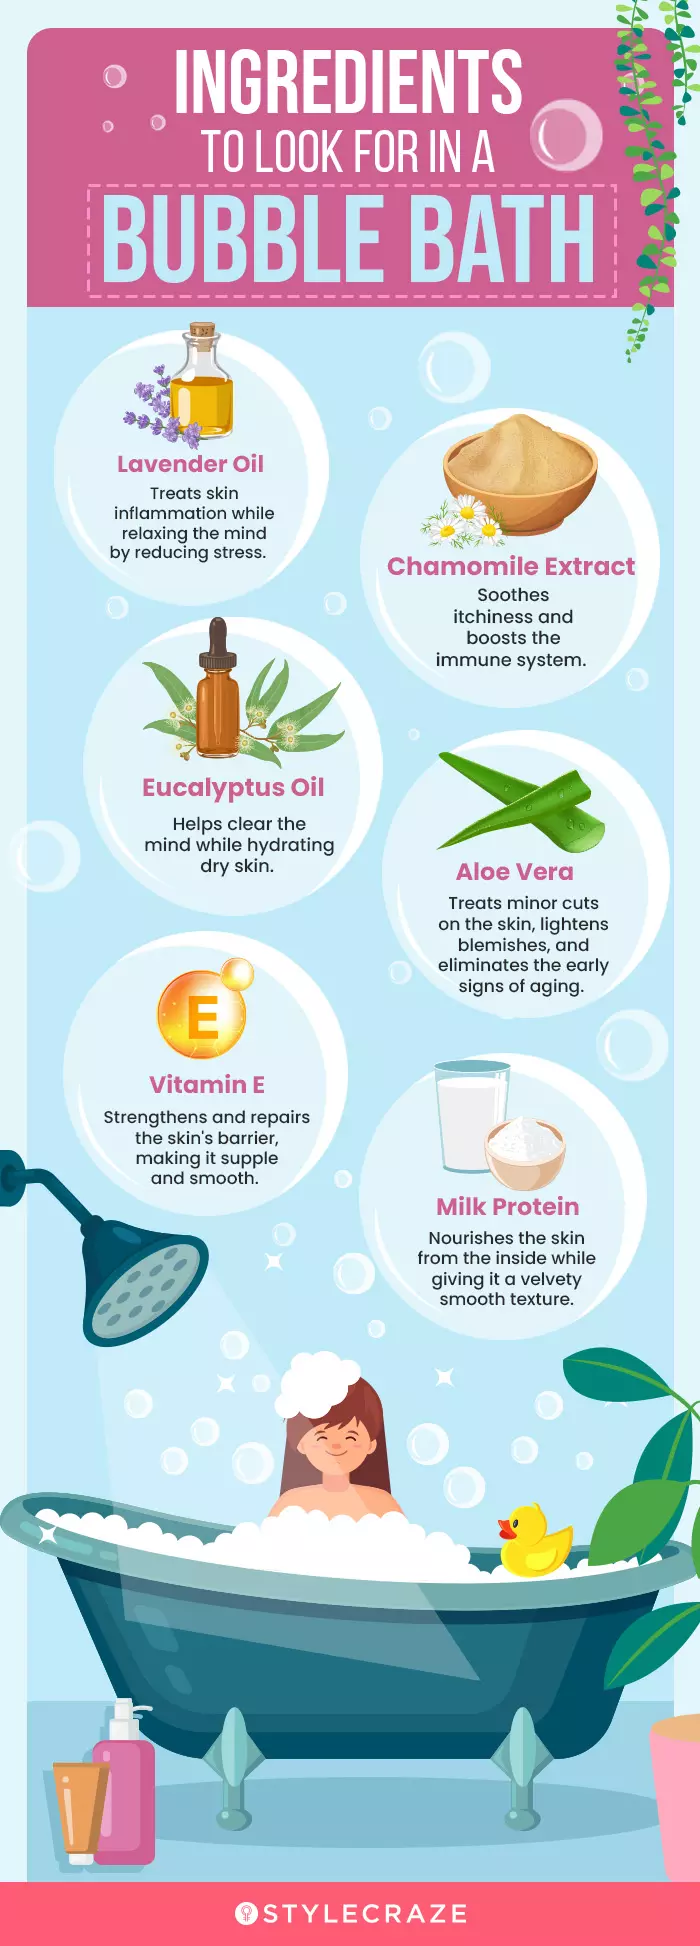 Ingredients To Look For In A Bubble Bath (infographic)